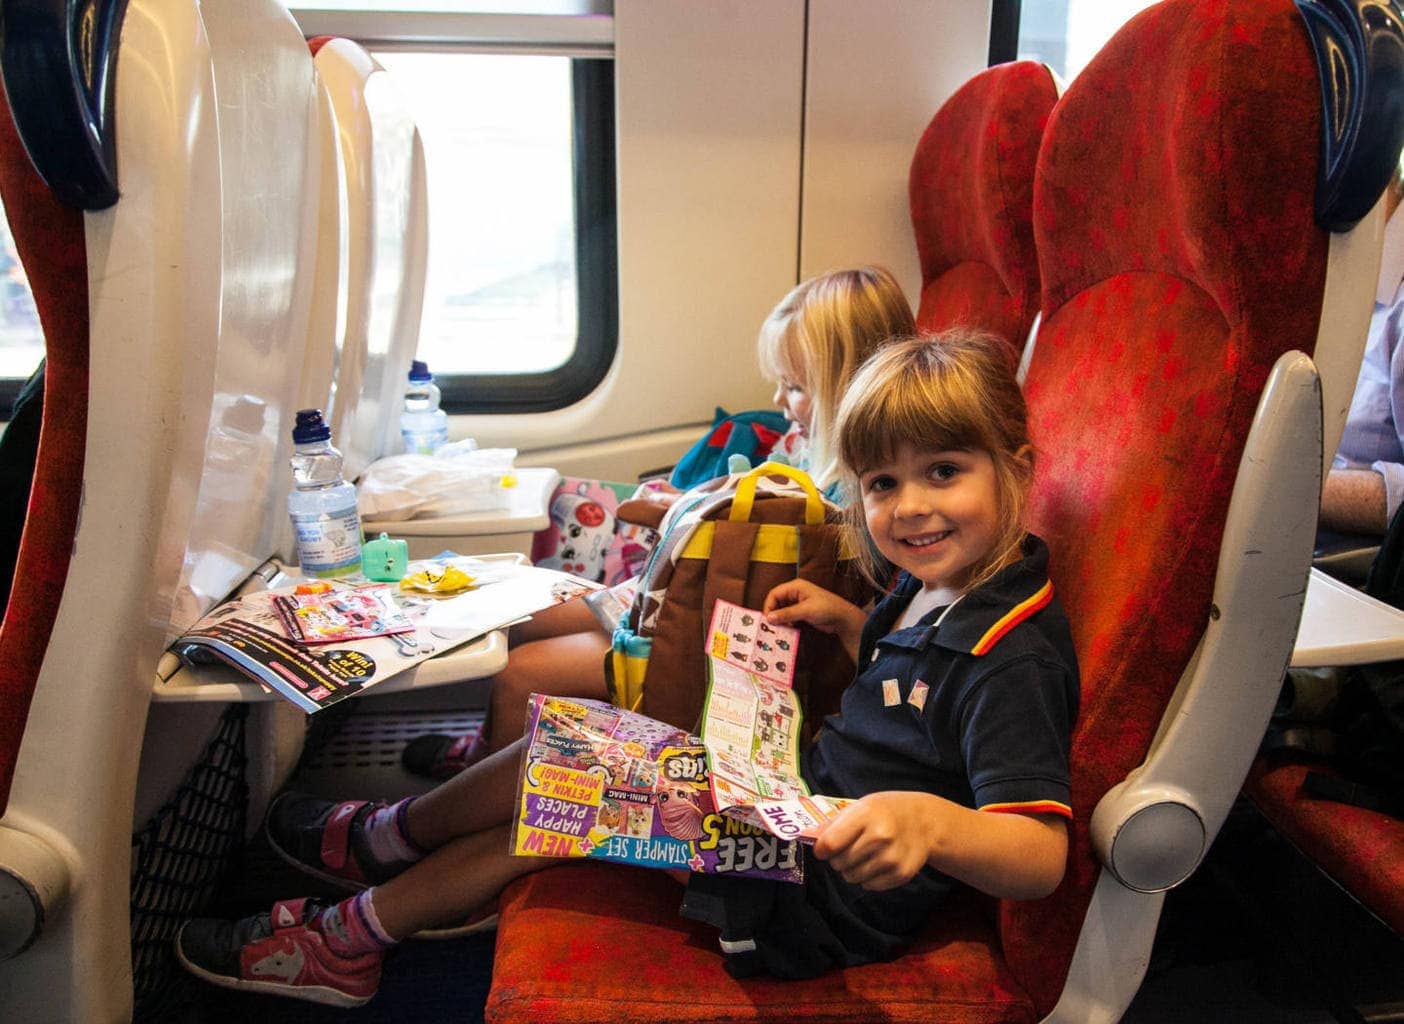 Travelling with Children | Is it Better by Train? www.minitravellers.co.uk